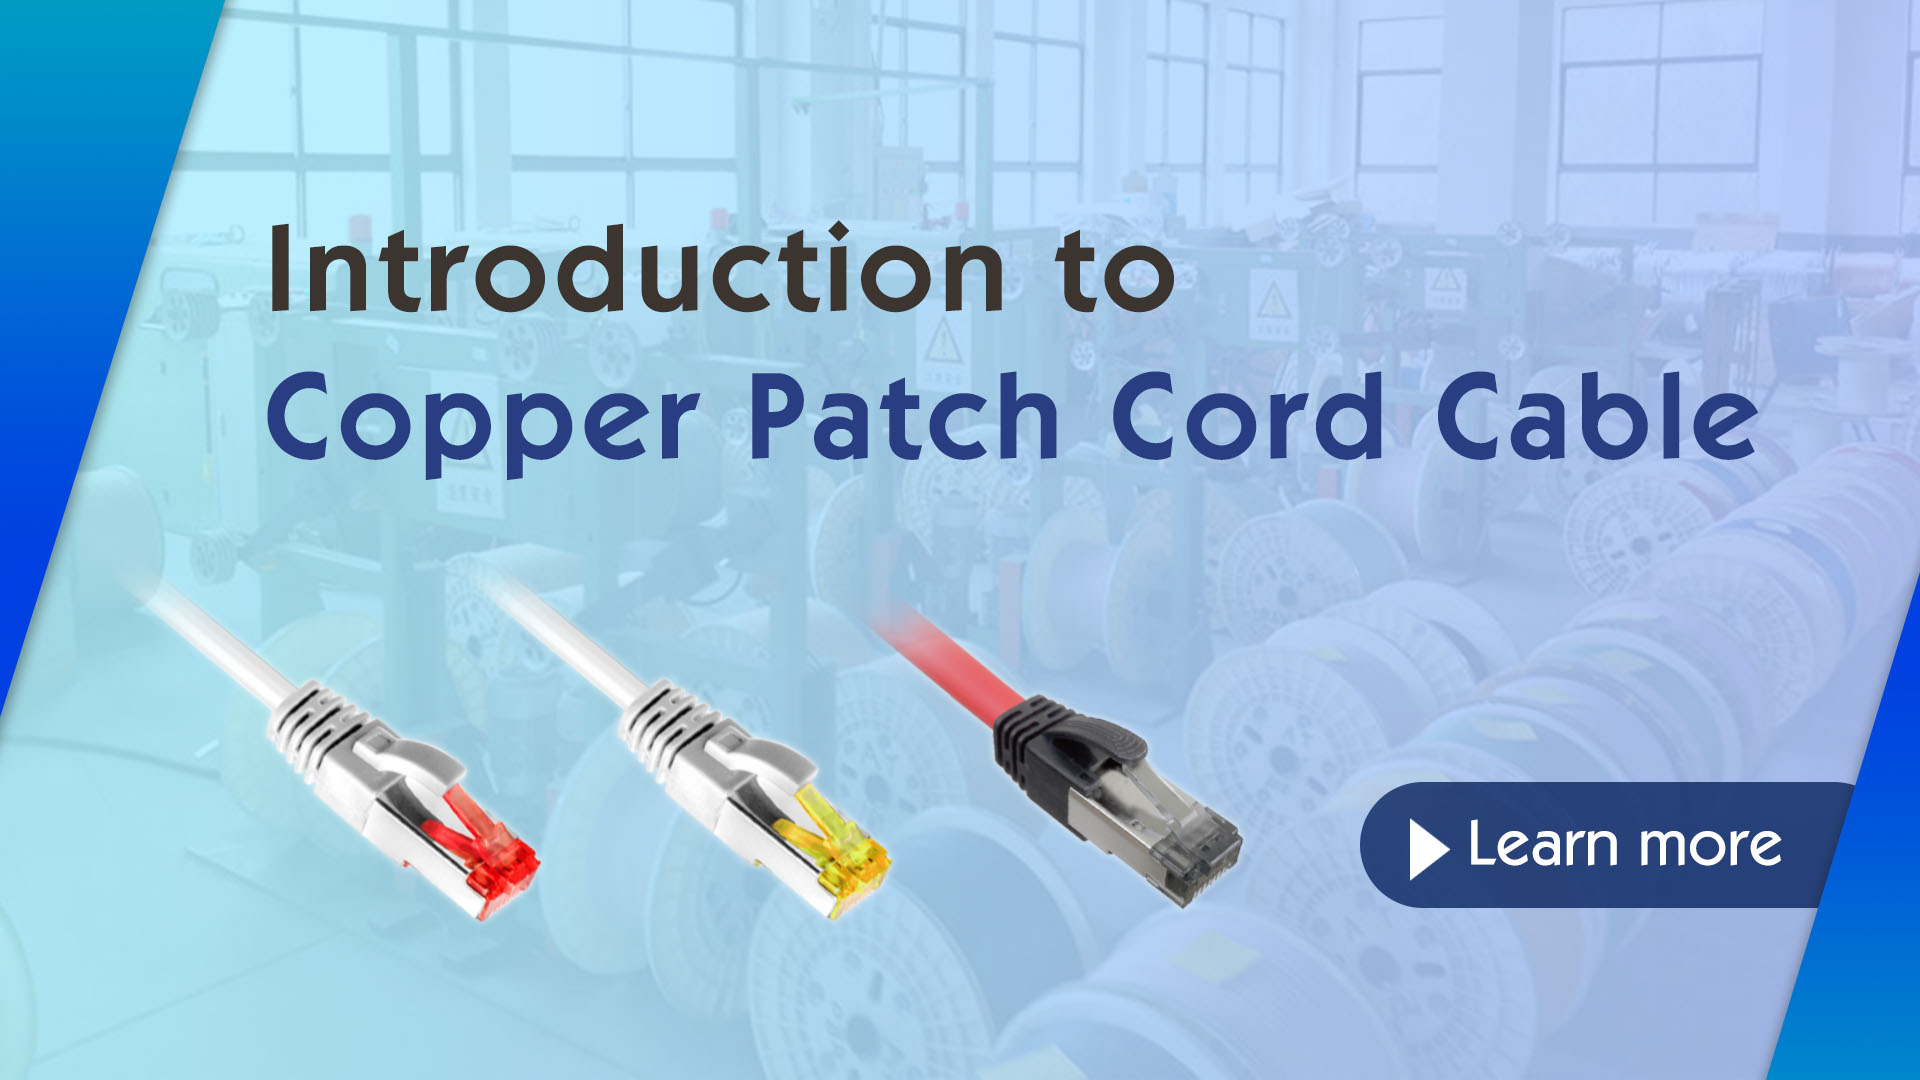 Introduction to copper patch cable